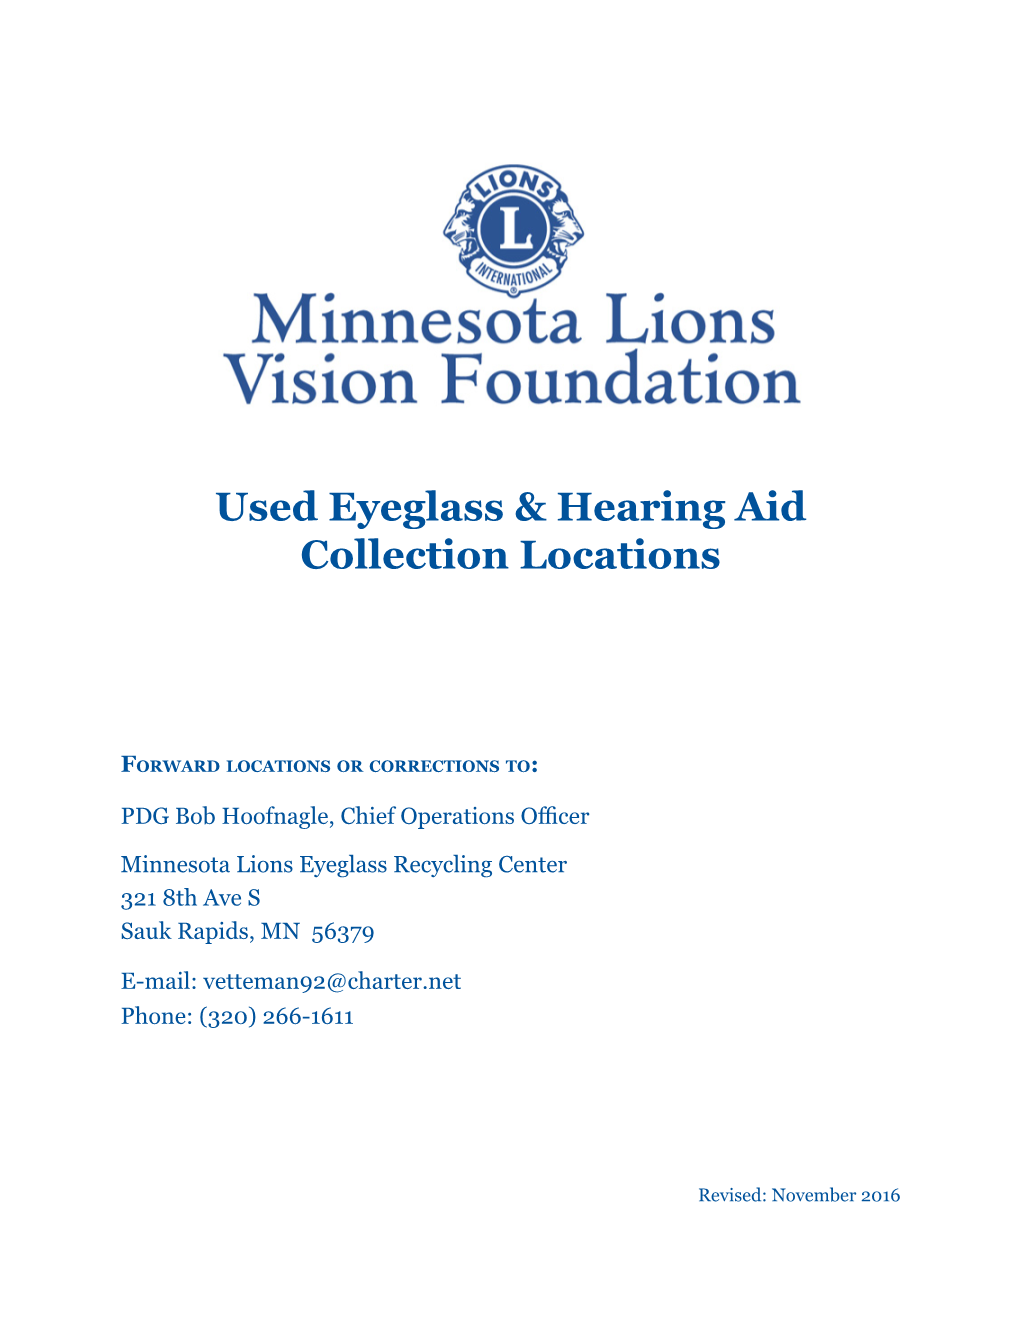 Used Eyeglass & Hearing Aid Collection Locations